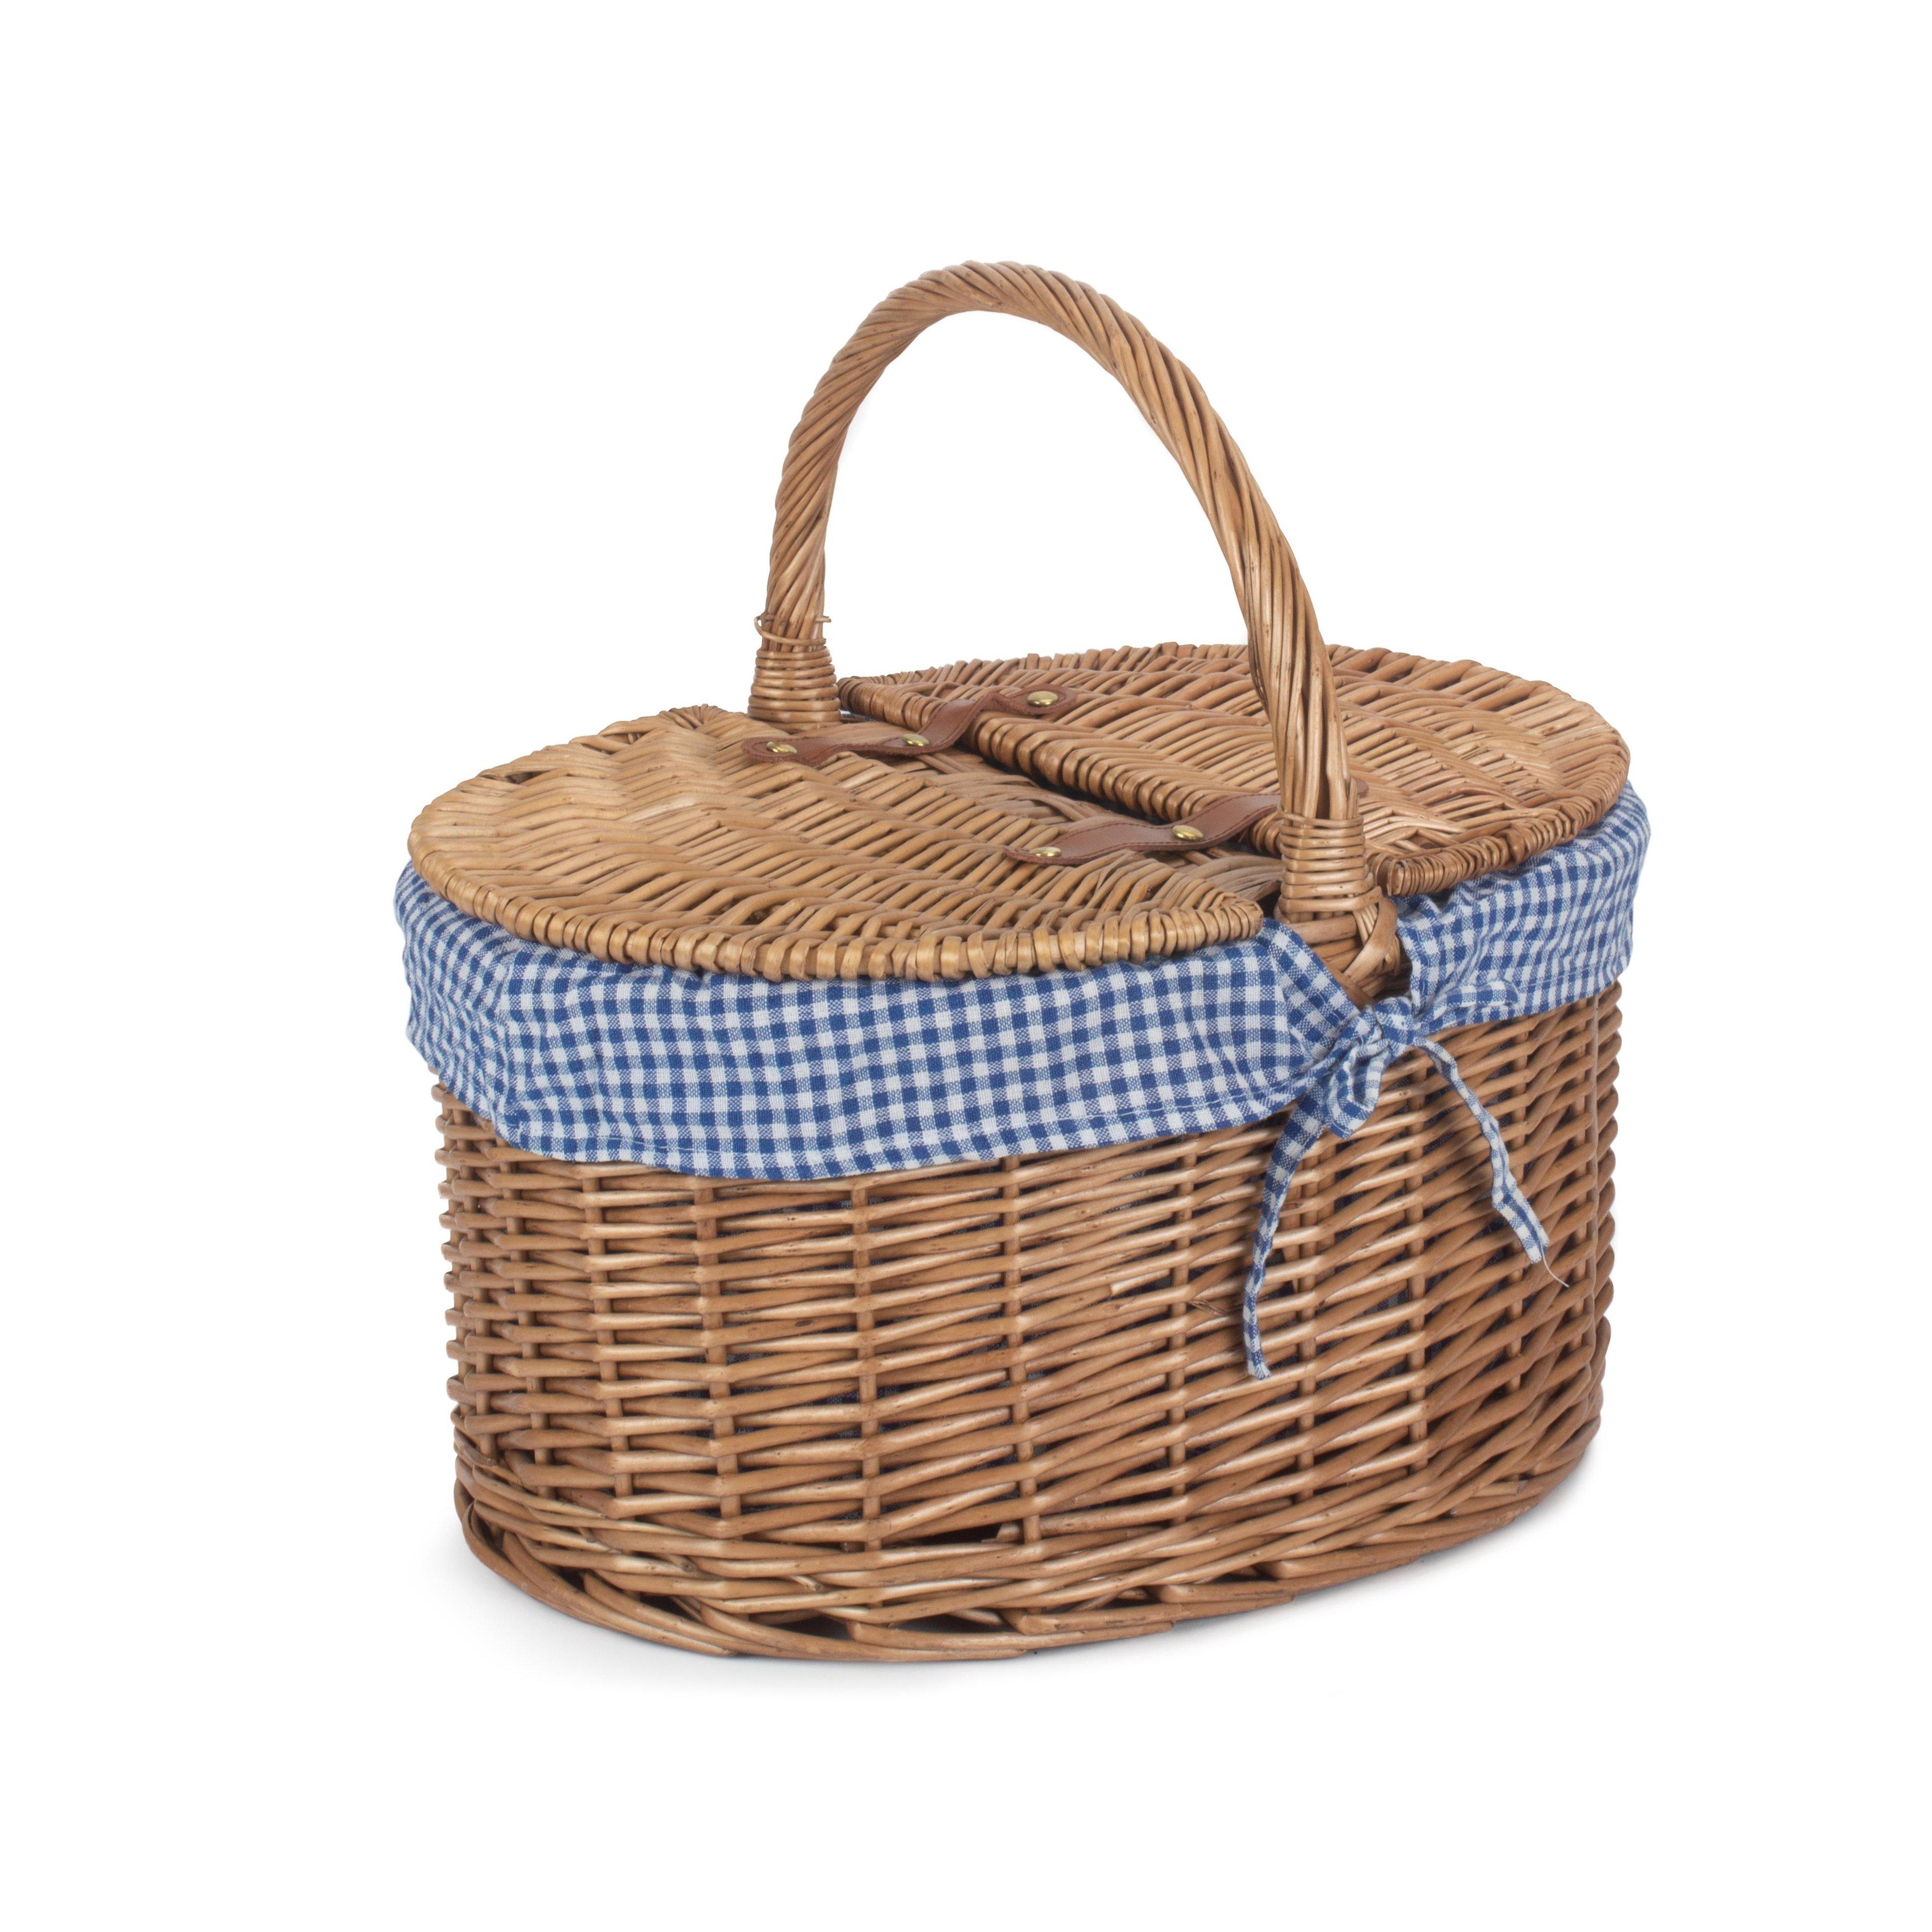 Wicker Light Steamed Oval Lidded Basket with Cotton Lining